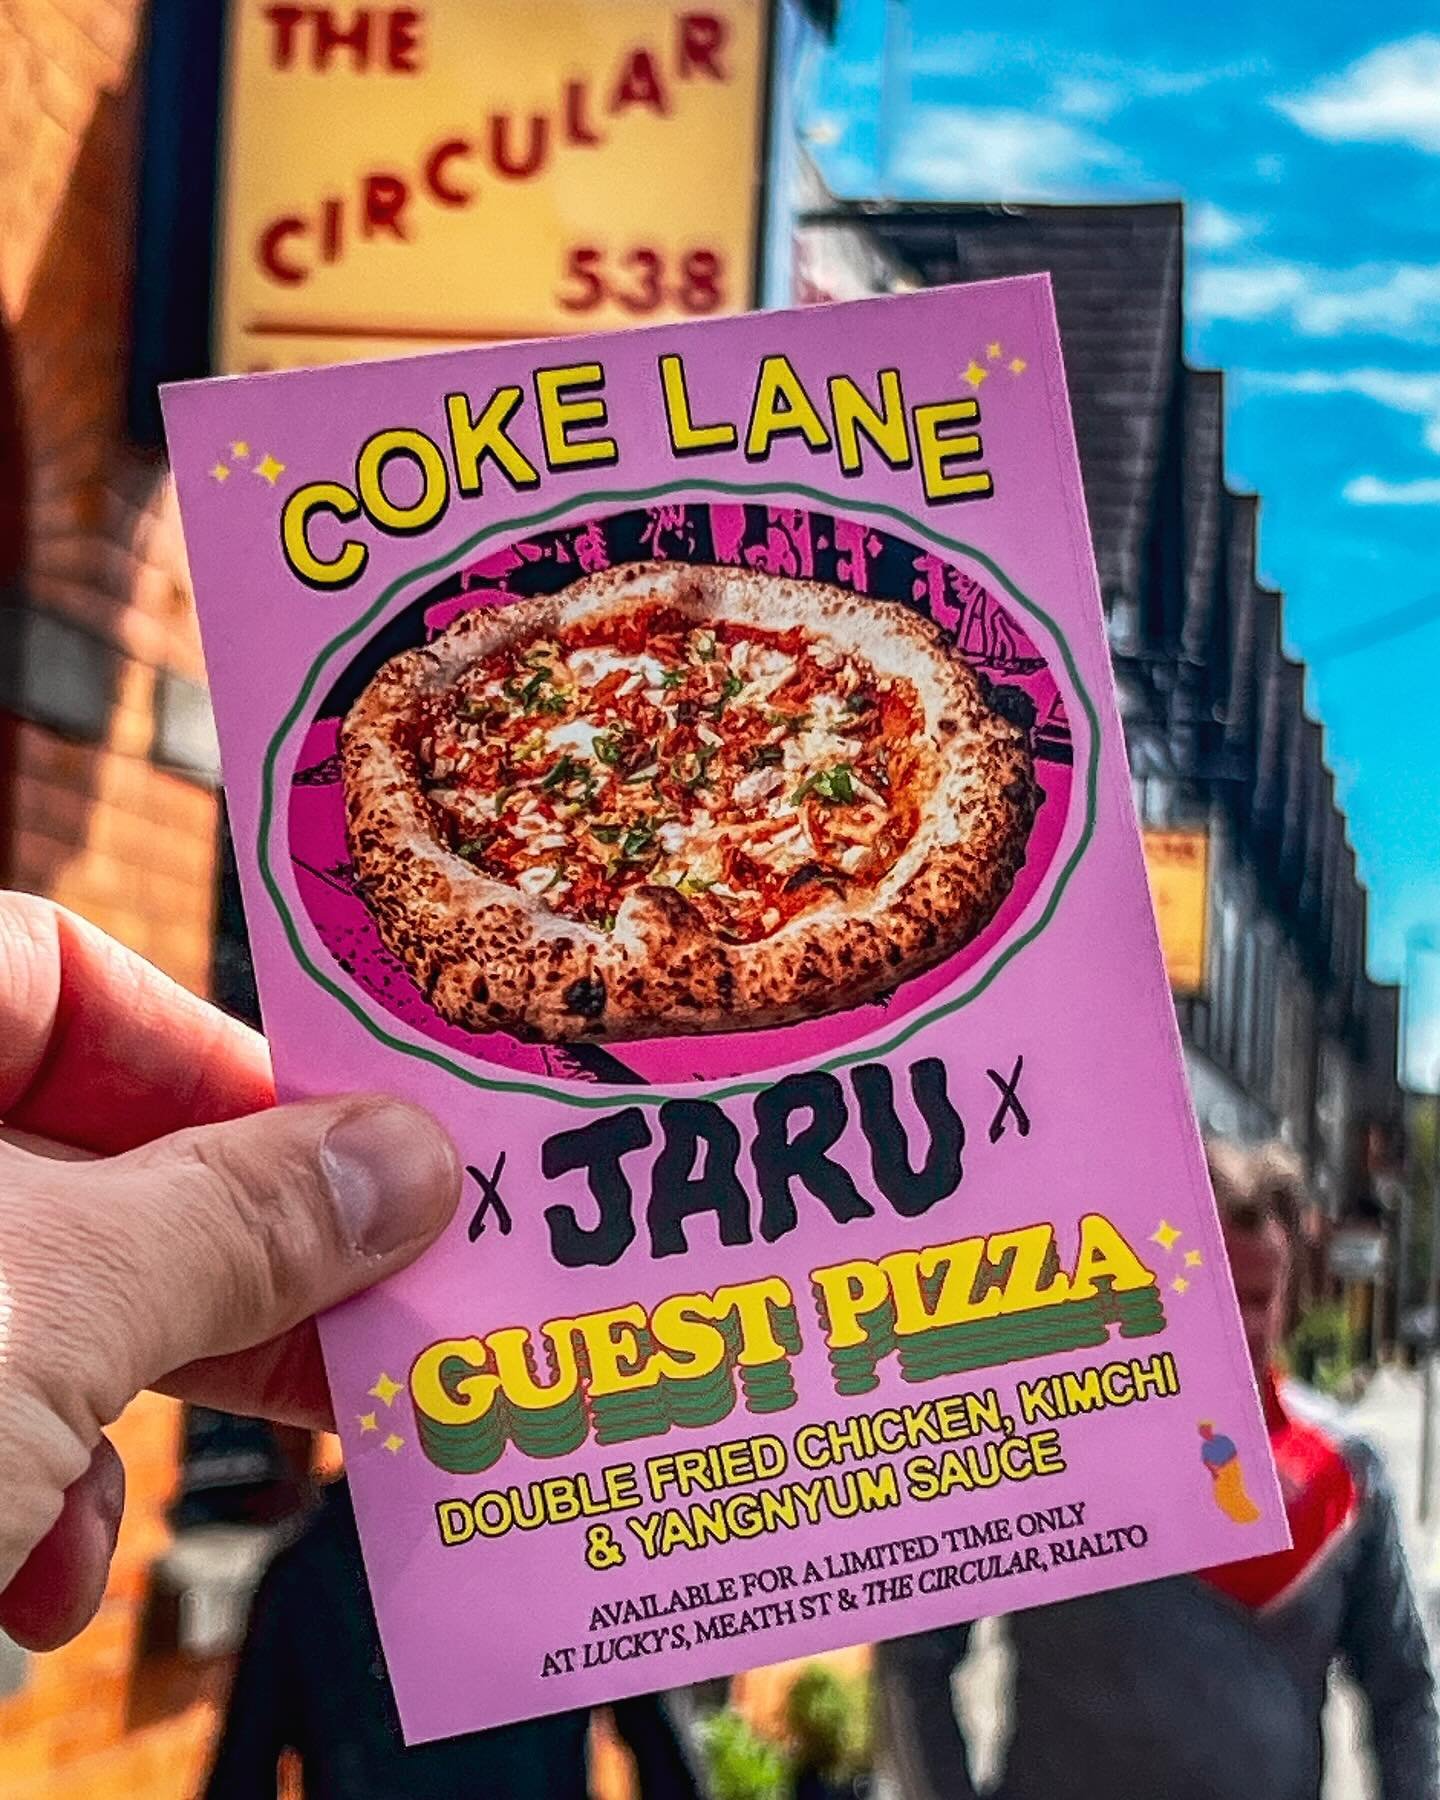 The new @cokelanepizza special@has landed and it&rsquo;s a real humdinger. A collab with @jarudublin with double fried chicken, kimchi and yangnyum sauce. Available for a limited time at both The Circular and @luckysdublin